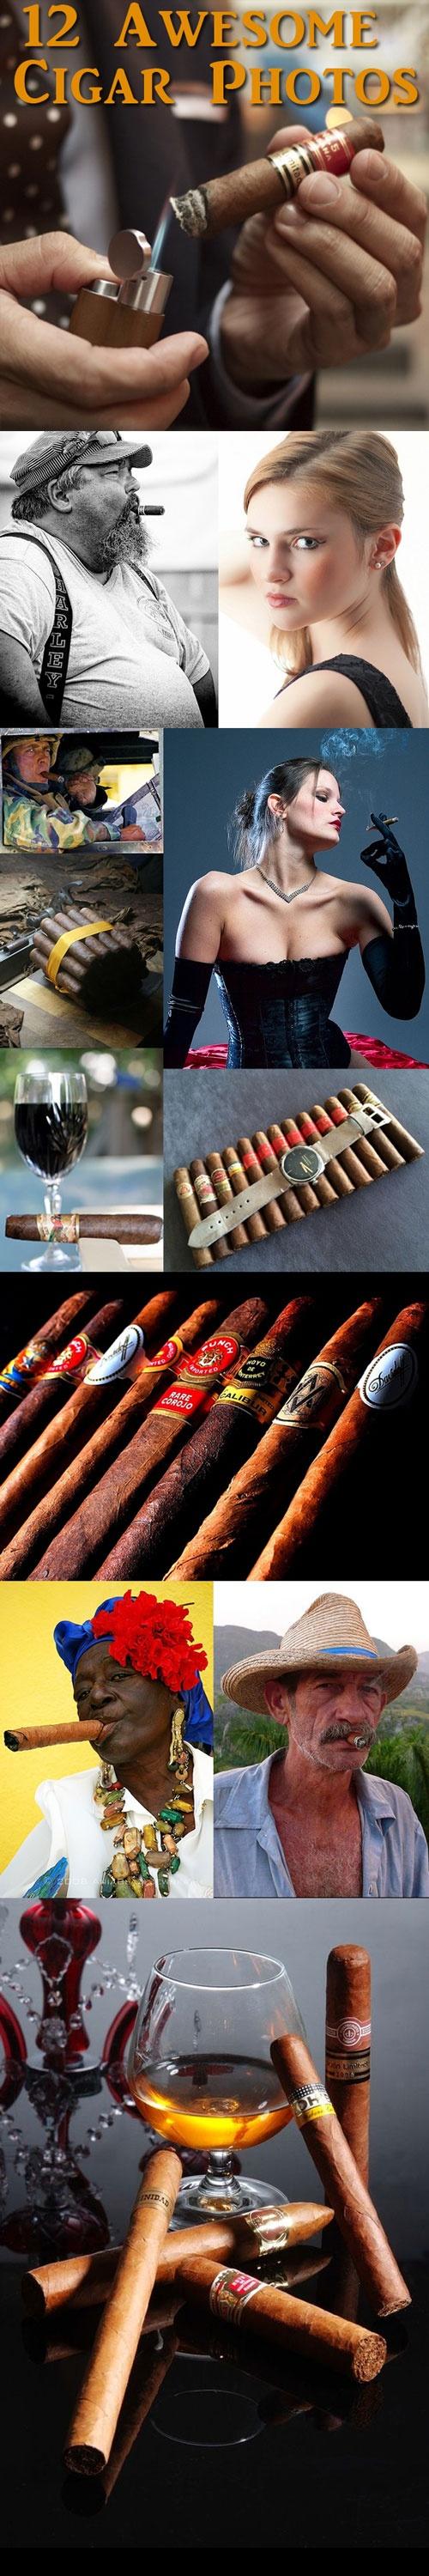 12 awesome cigar images